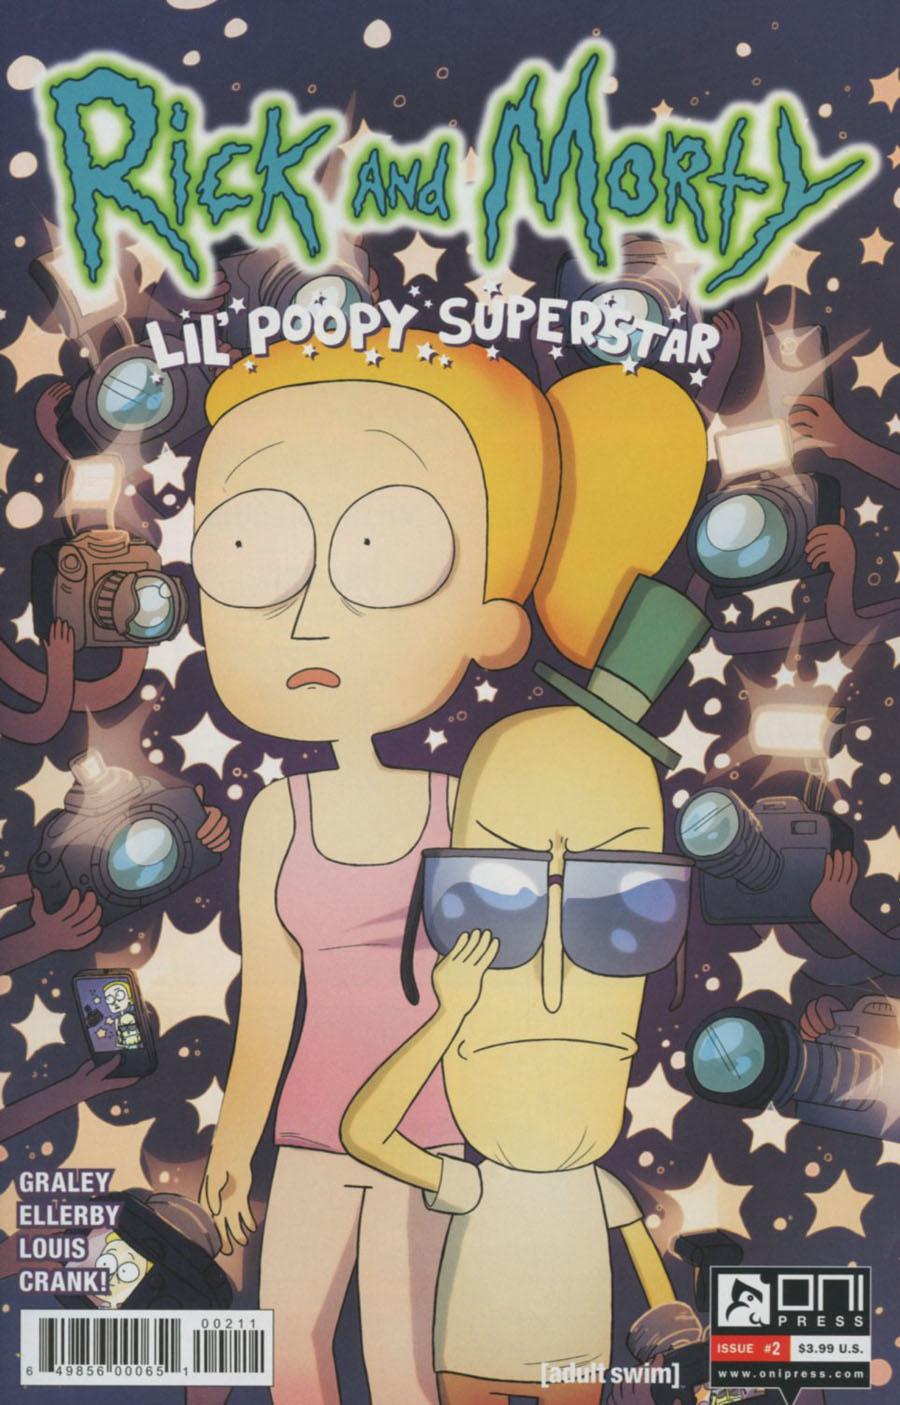 Rick And Morty Lil Poopy Superstar Vol. 1 #2